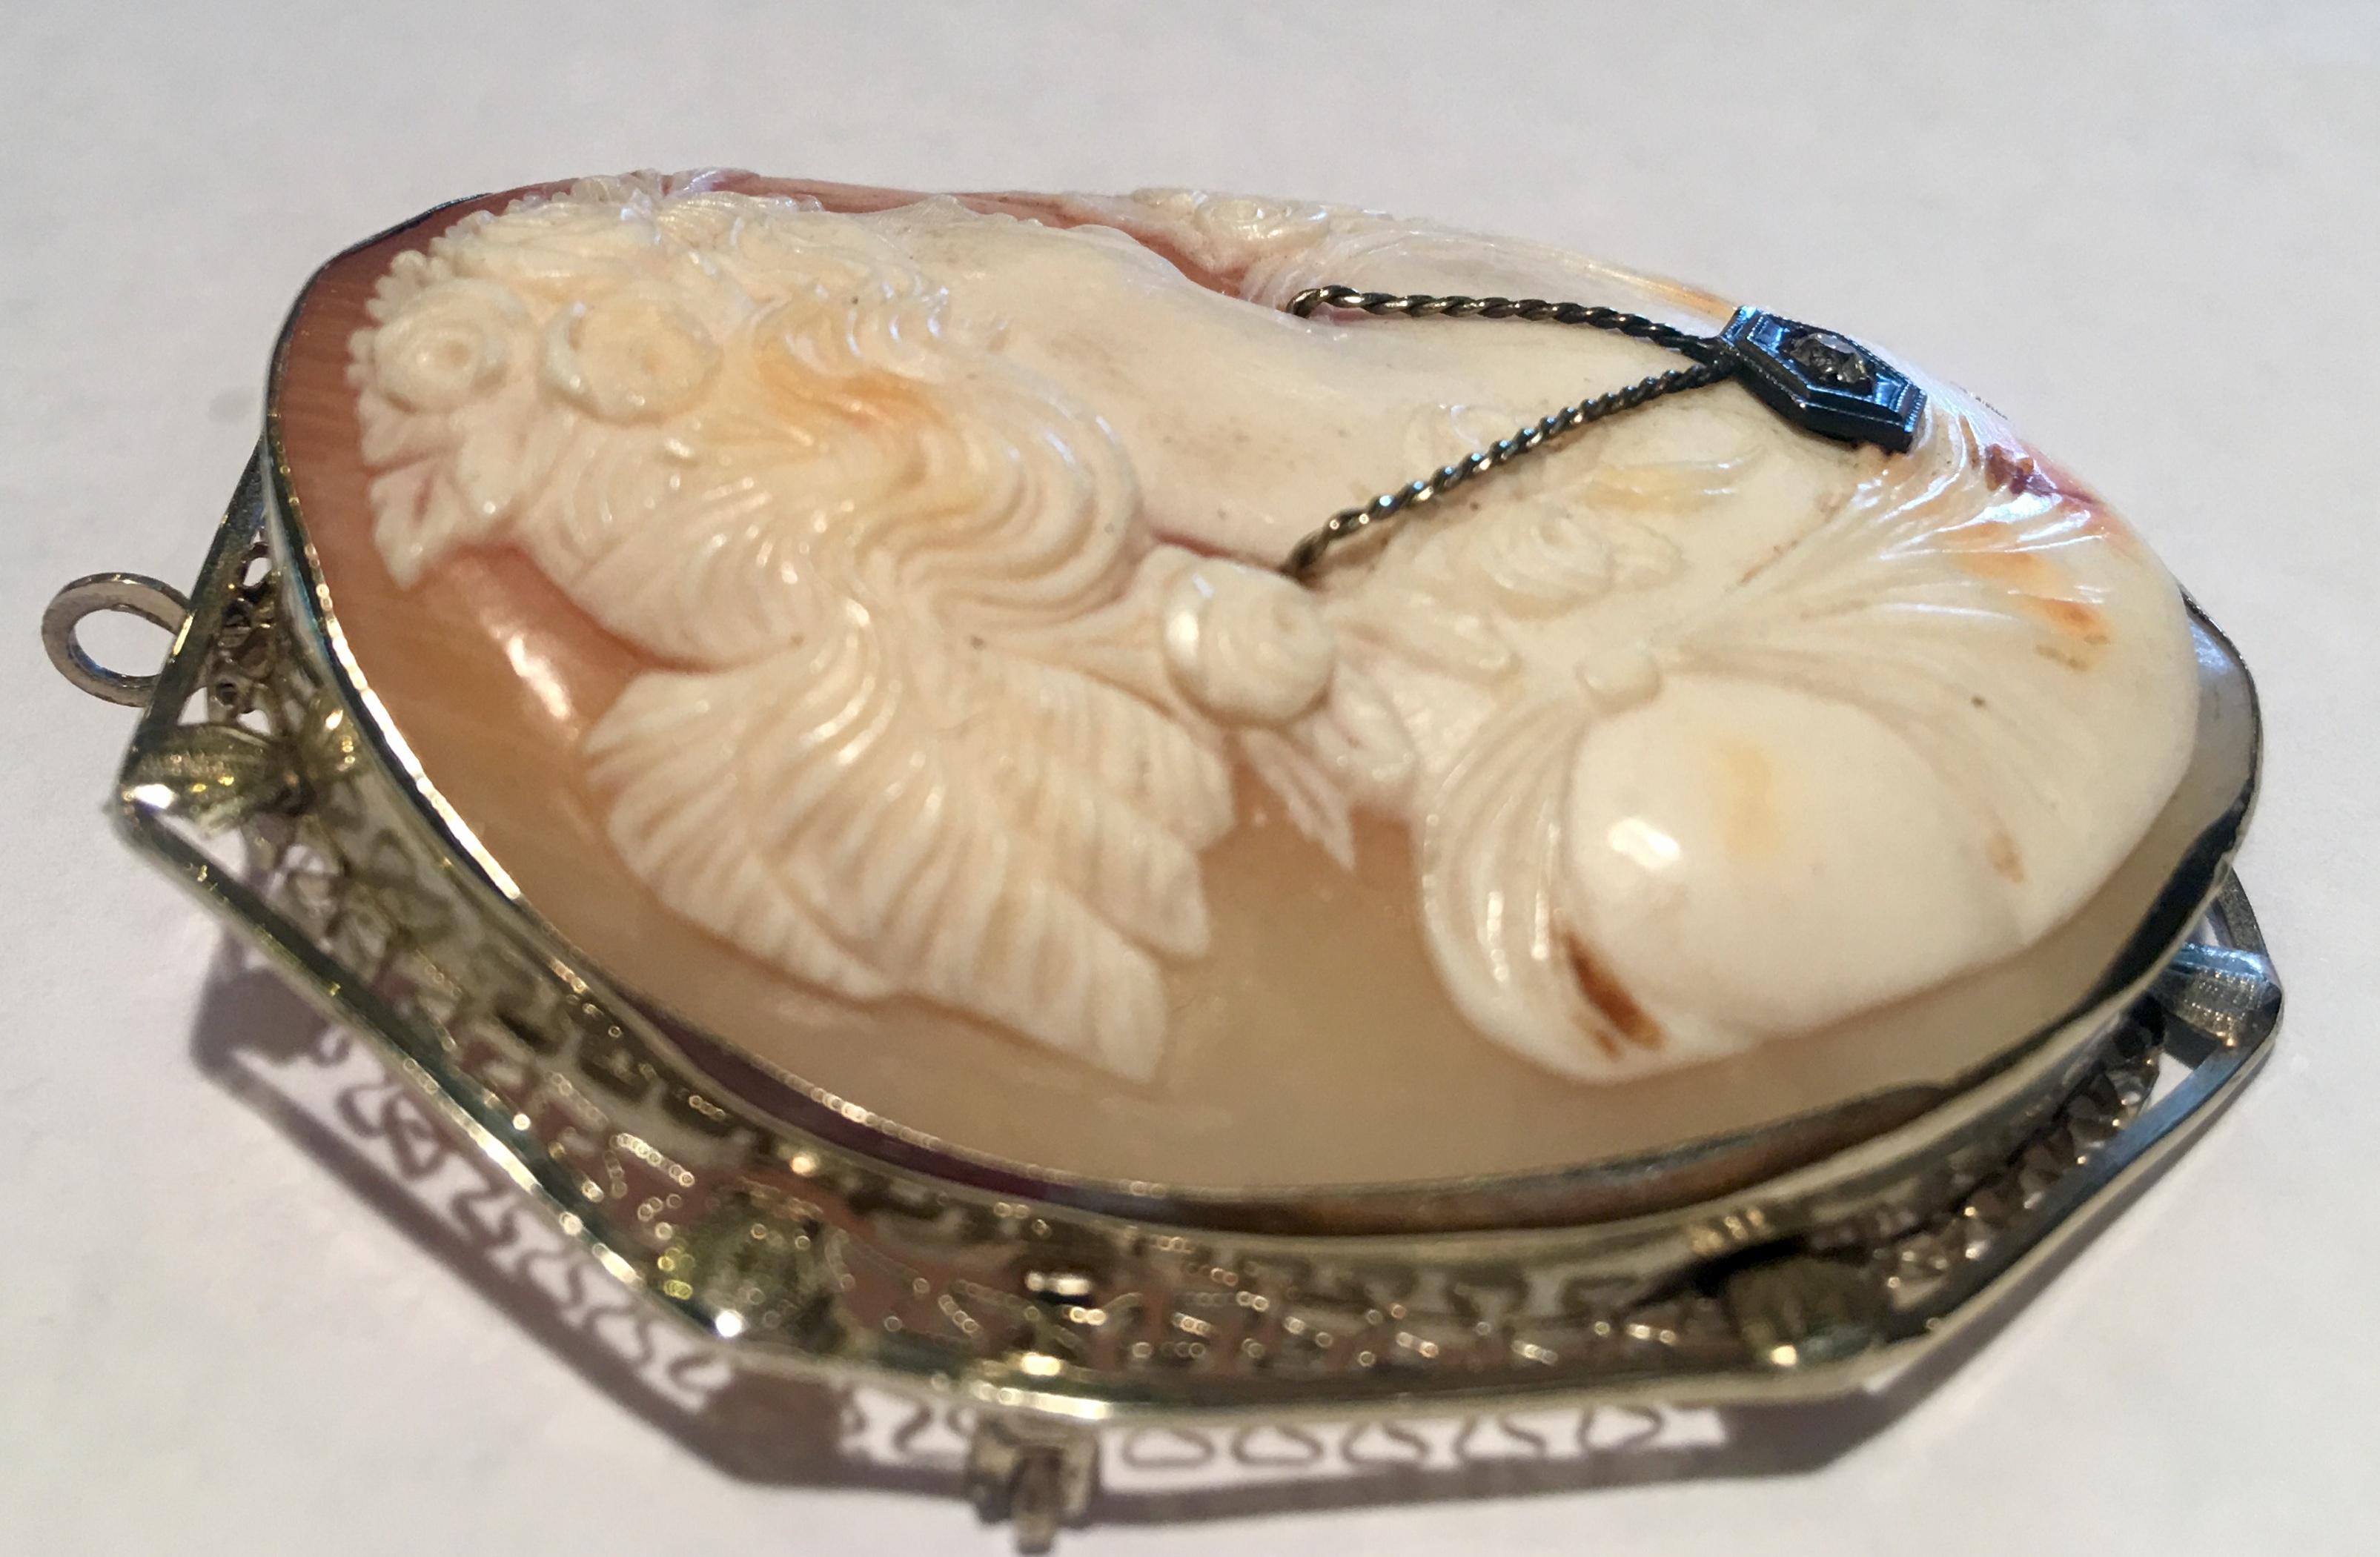 Antique, large, 14 karat white gold, elaborately hand carved shell cameo brooch or pendant depicts a woman in profile, with a pompadour and gown festooned with flowers and wearing a necklace with a single rose cut diamond.

May be worn as a brooch